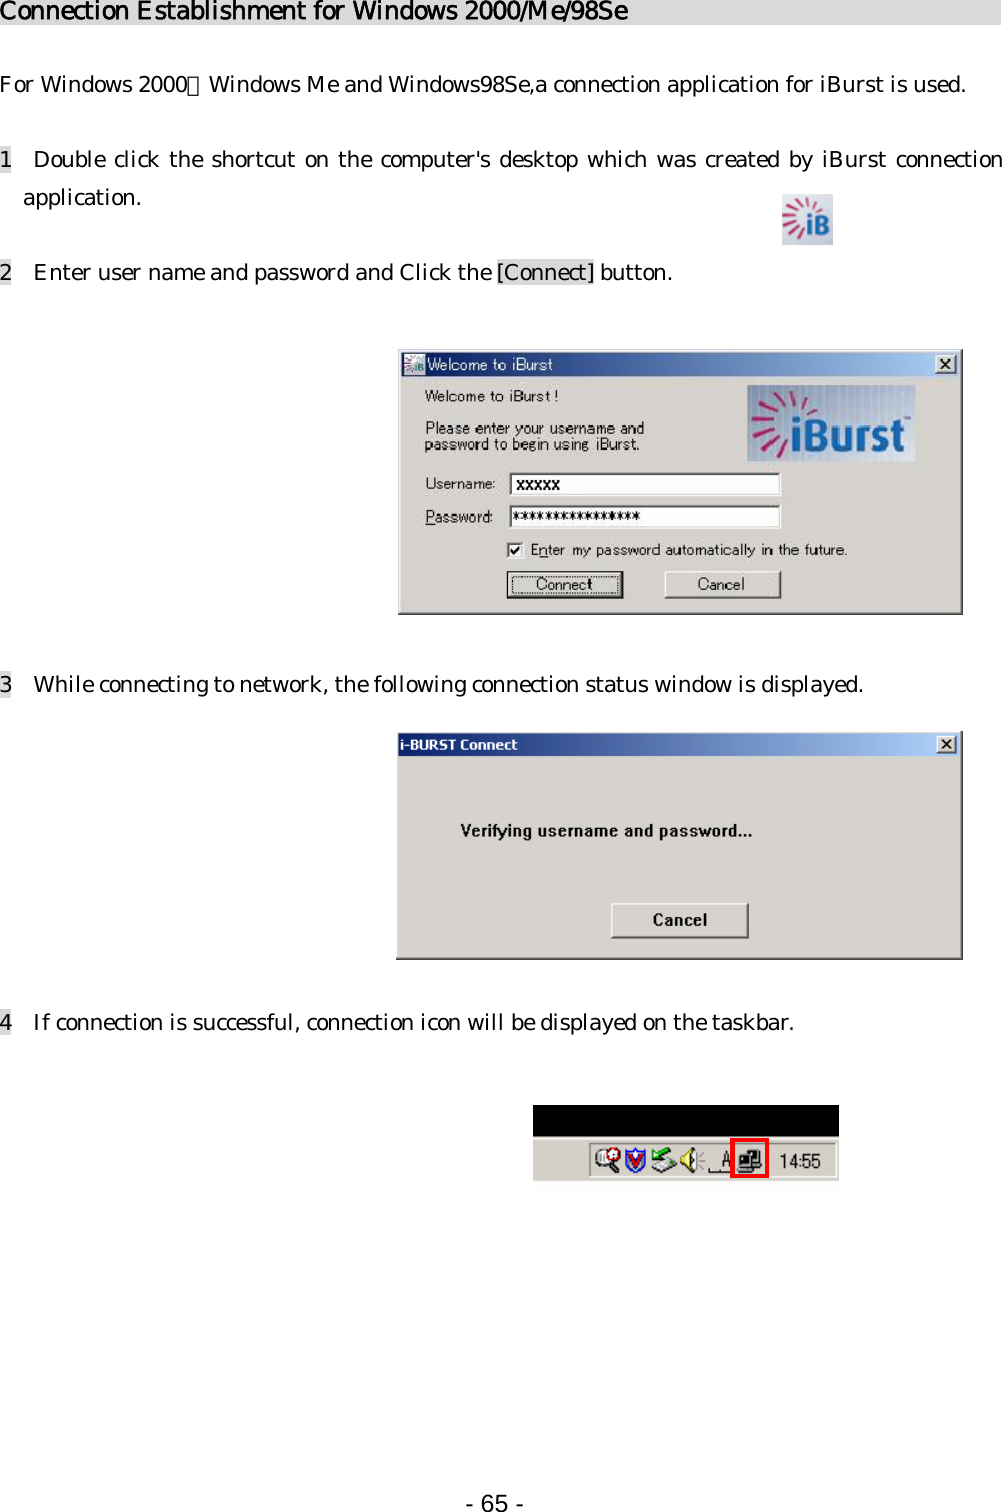 Connection Establishment for Windows 2000/Me/98Se                                For Windows 2000、Windows Me and Windows98Se,a connection application for iBurst is used.  1  Double click the shortcut on the computer&apos;s desktop which was created by iBurst connection application.  2    Enter user name and password and Click the [Connect] button.             3    While connecting to network, the following connection status window is displayed.         4    If connection is successful, connection icon will be displayed on the taskbar.            - 65 -  